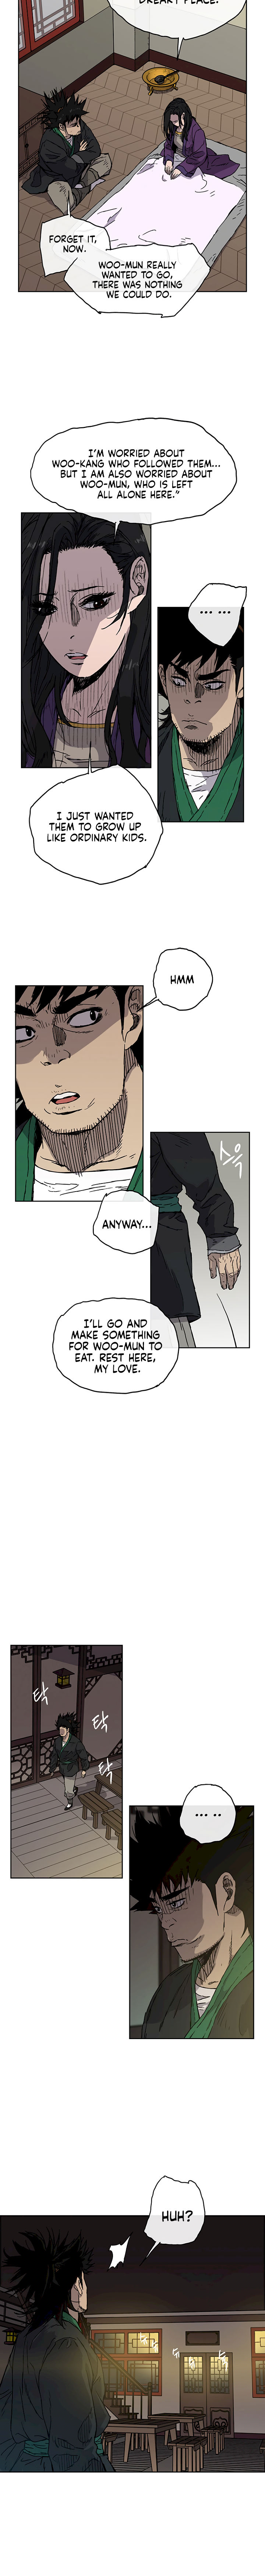 The Undefeatable Swordsman - Chapter 1 Page 25